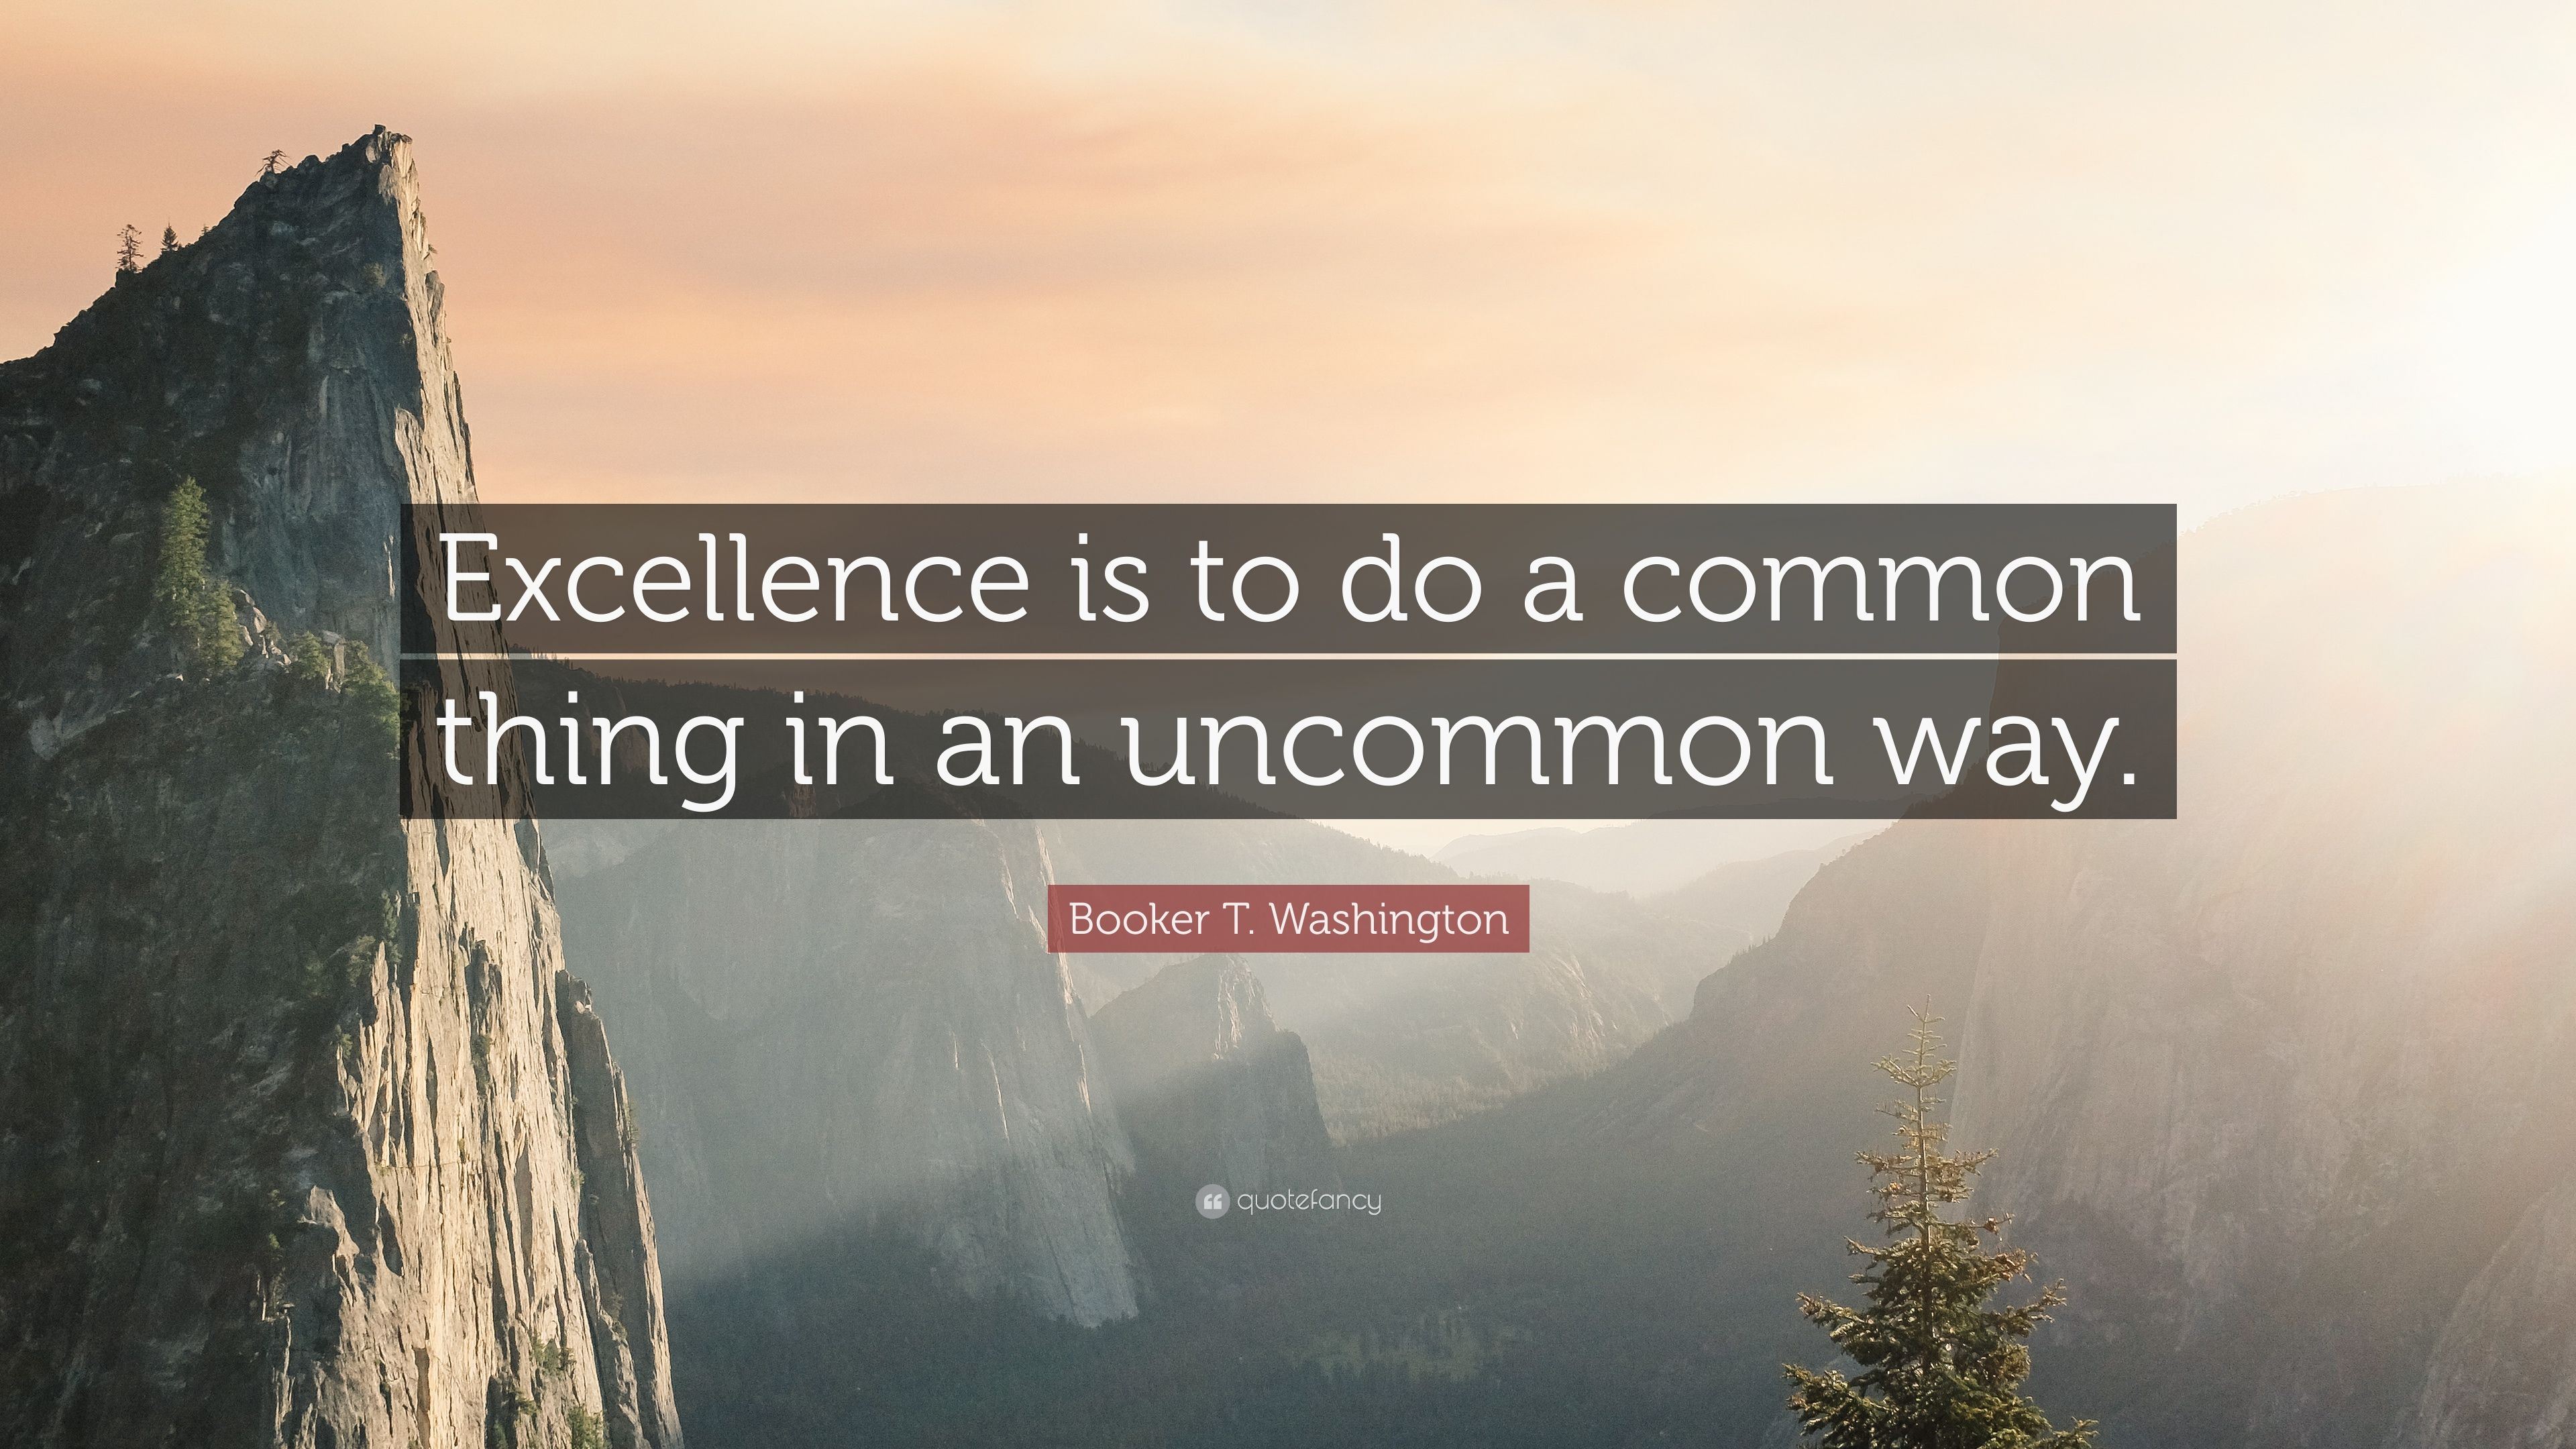 Booker T. Washington Quote: “Excellence is to do a common thing